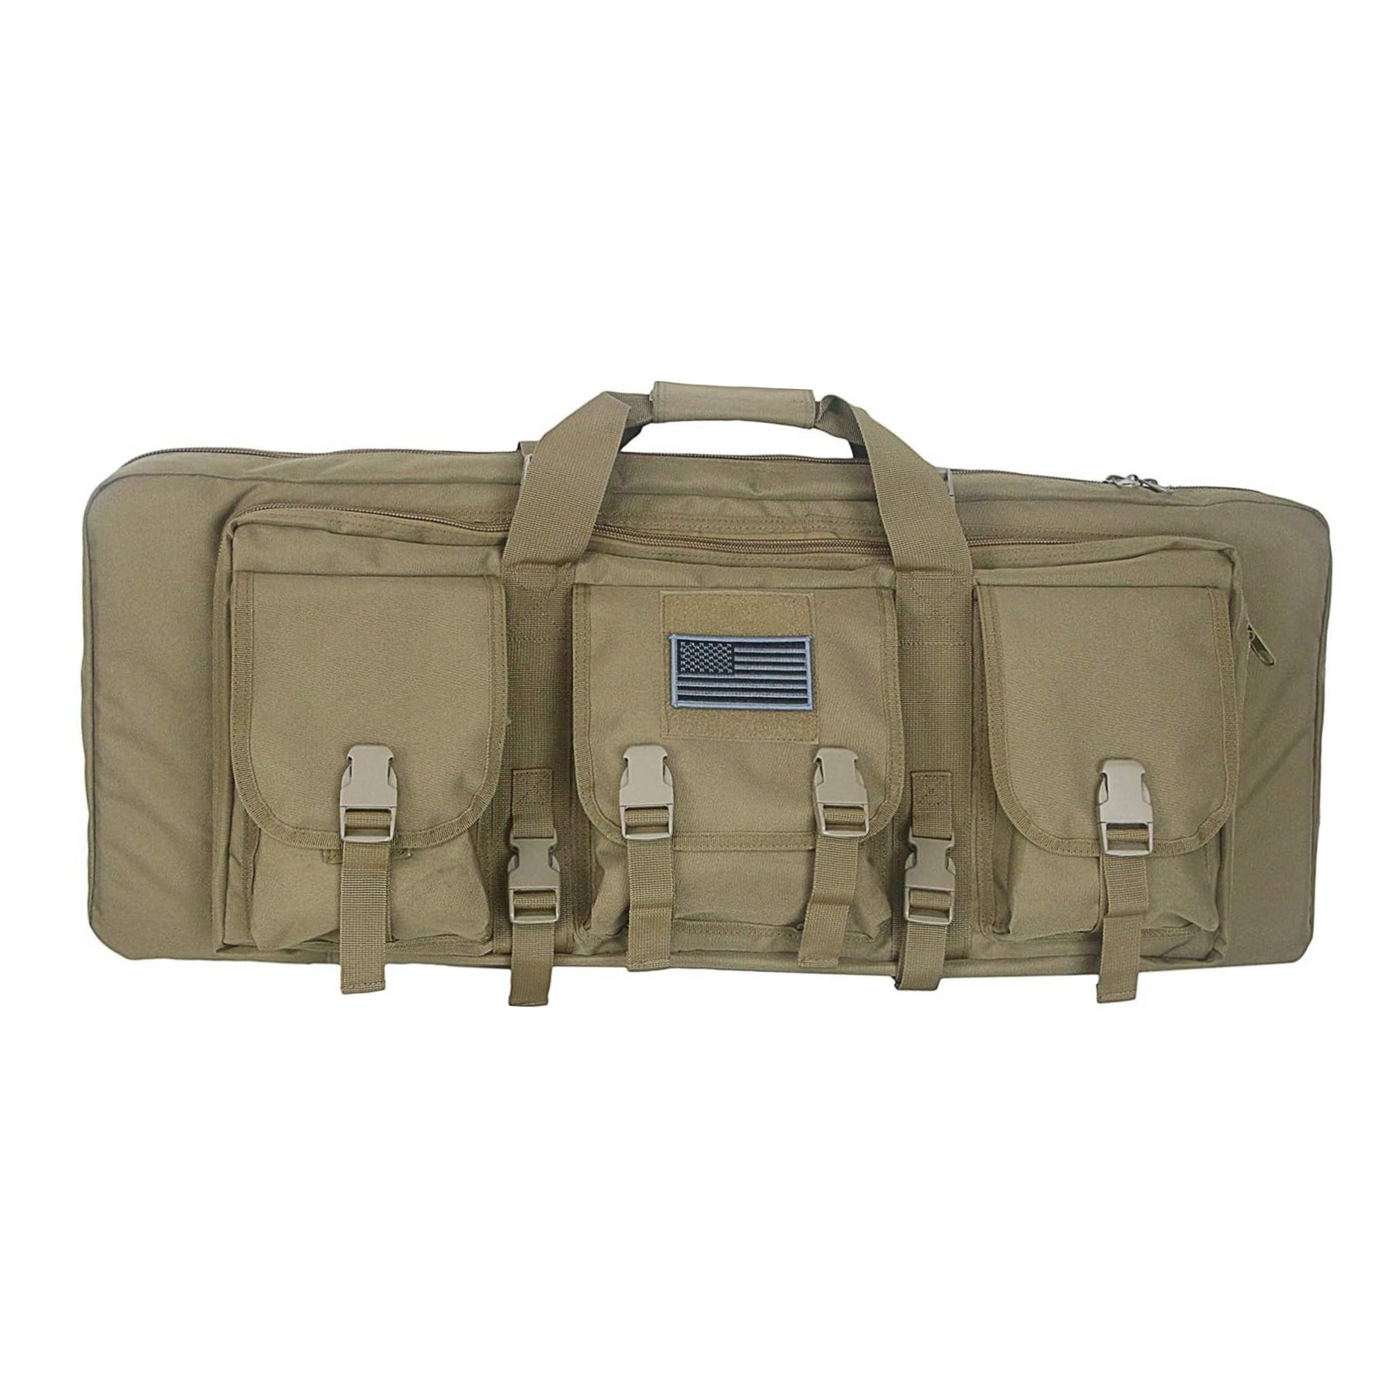 Double rifle case with tactical features, waterproofing, and padding for optimal hunting use with American Classic firearms